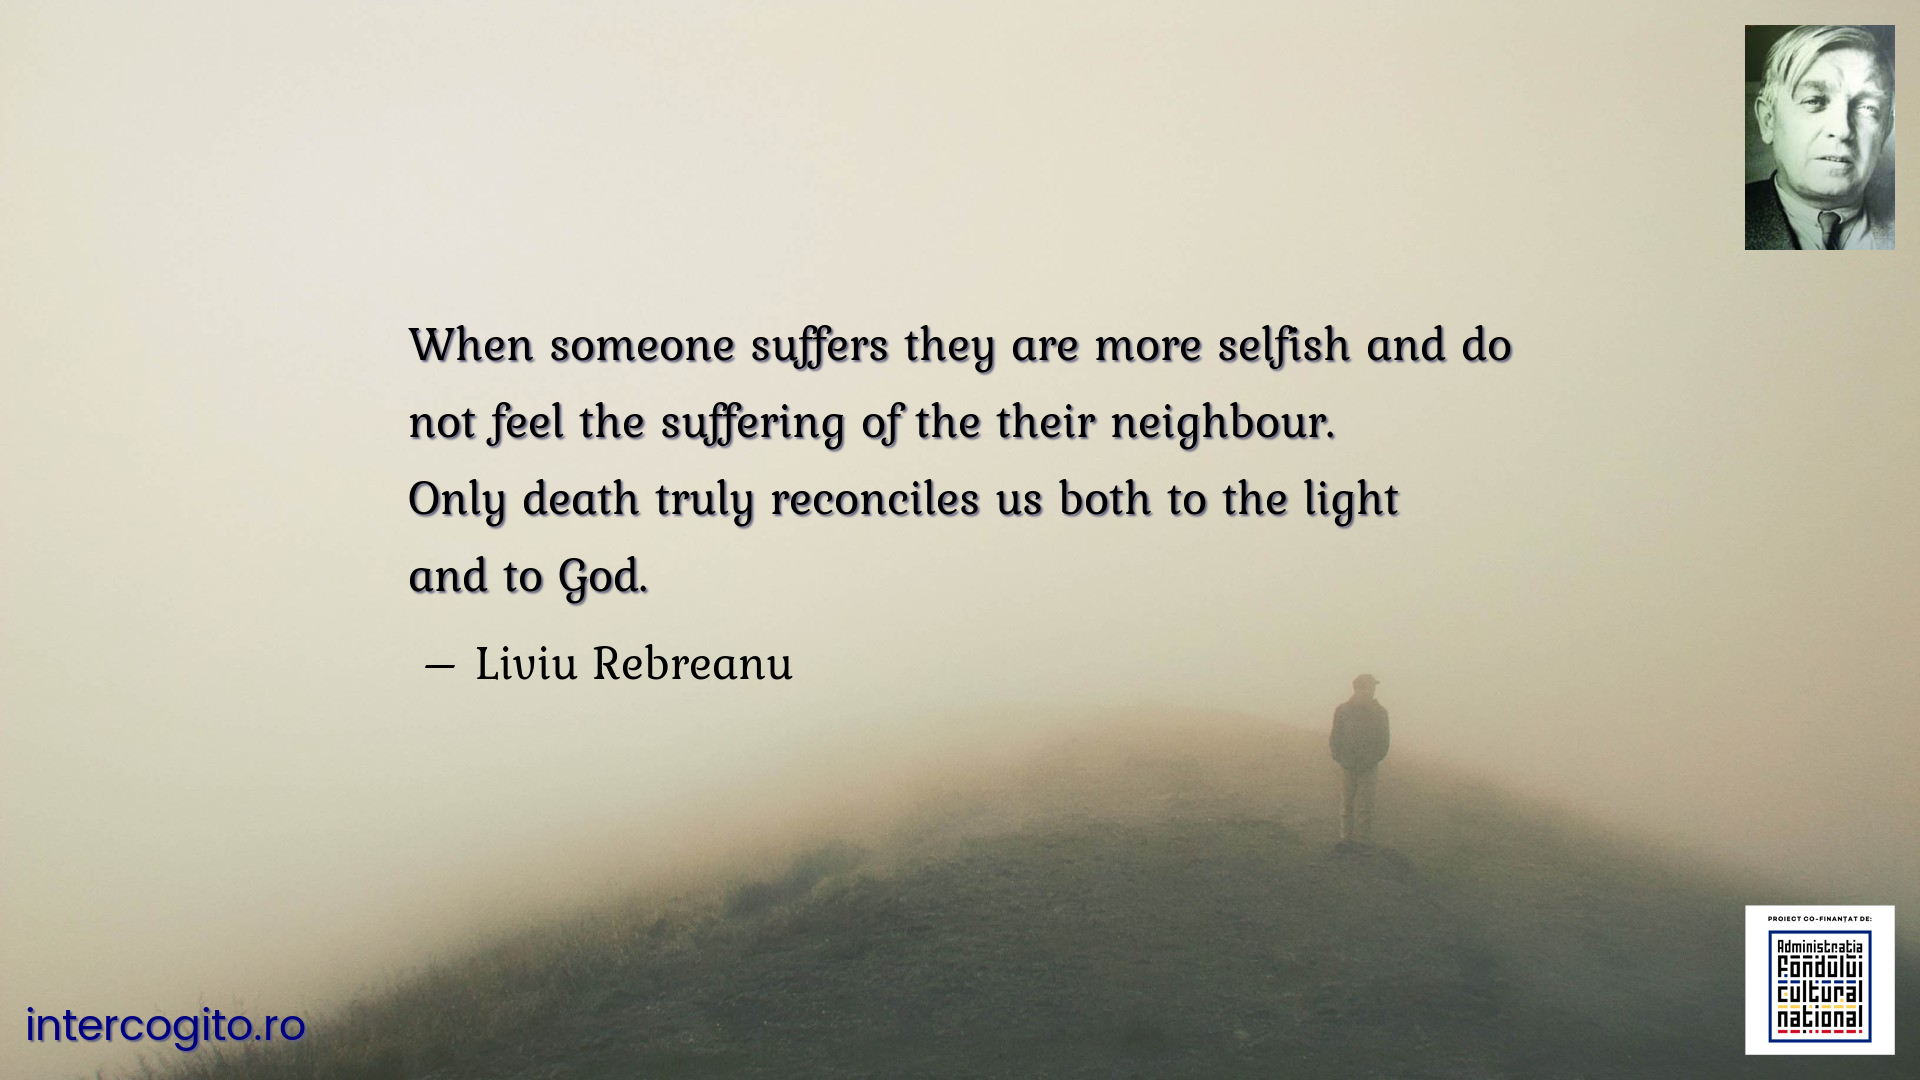 When someone suffers they are more selfish and do not feel the suffering of the their neighbour. Only death truly reconciles us both to the light and to God.